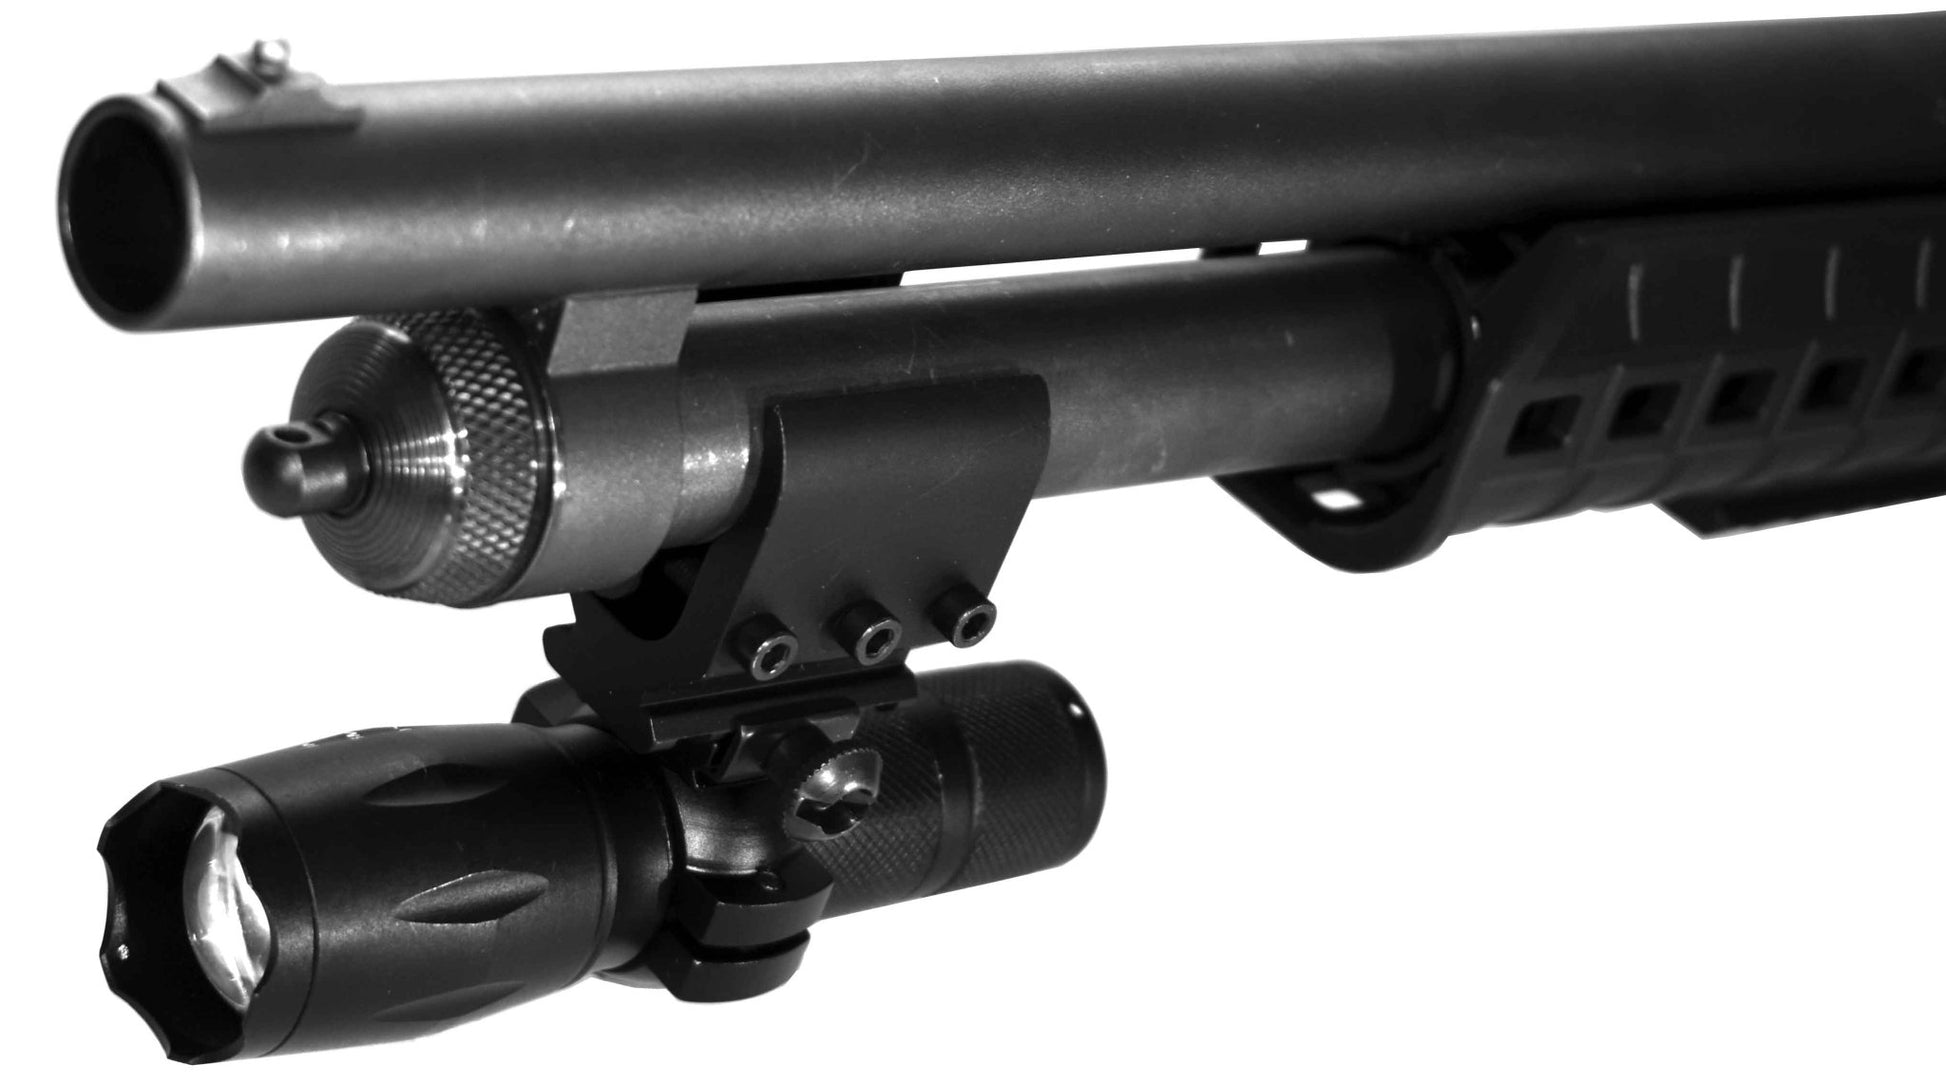 Tactical flashlight 1000 lumen with magazine tube mount compatible with 20 gauge pumps. - TRINITY SUPPLY INC